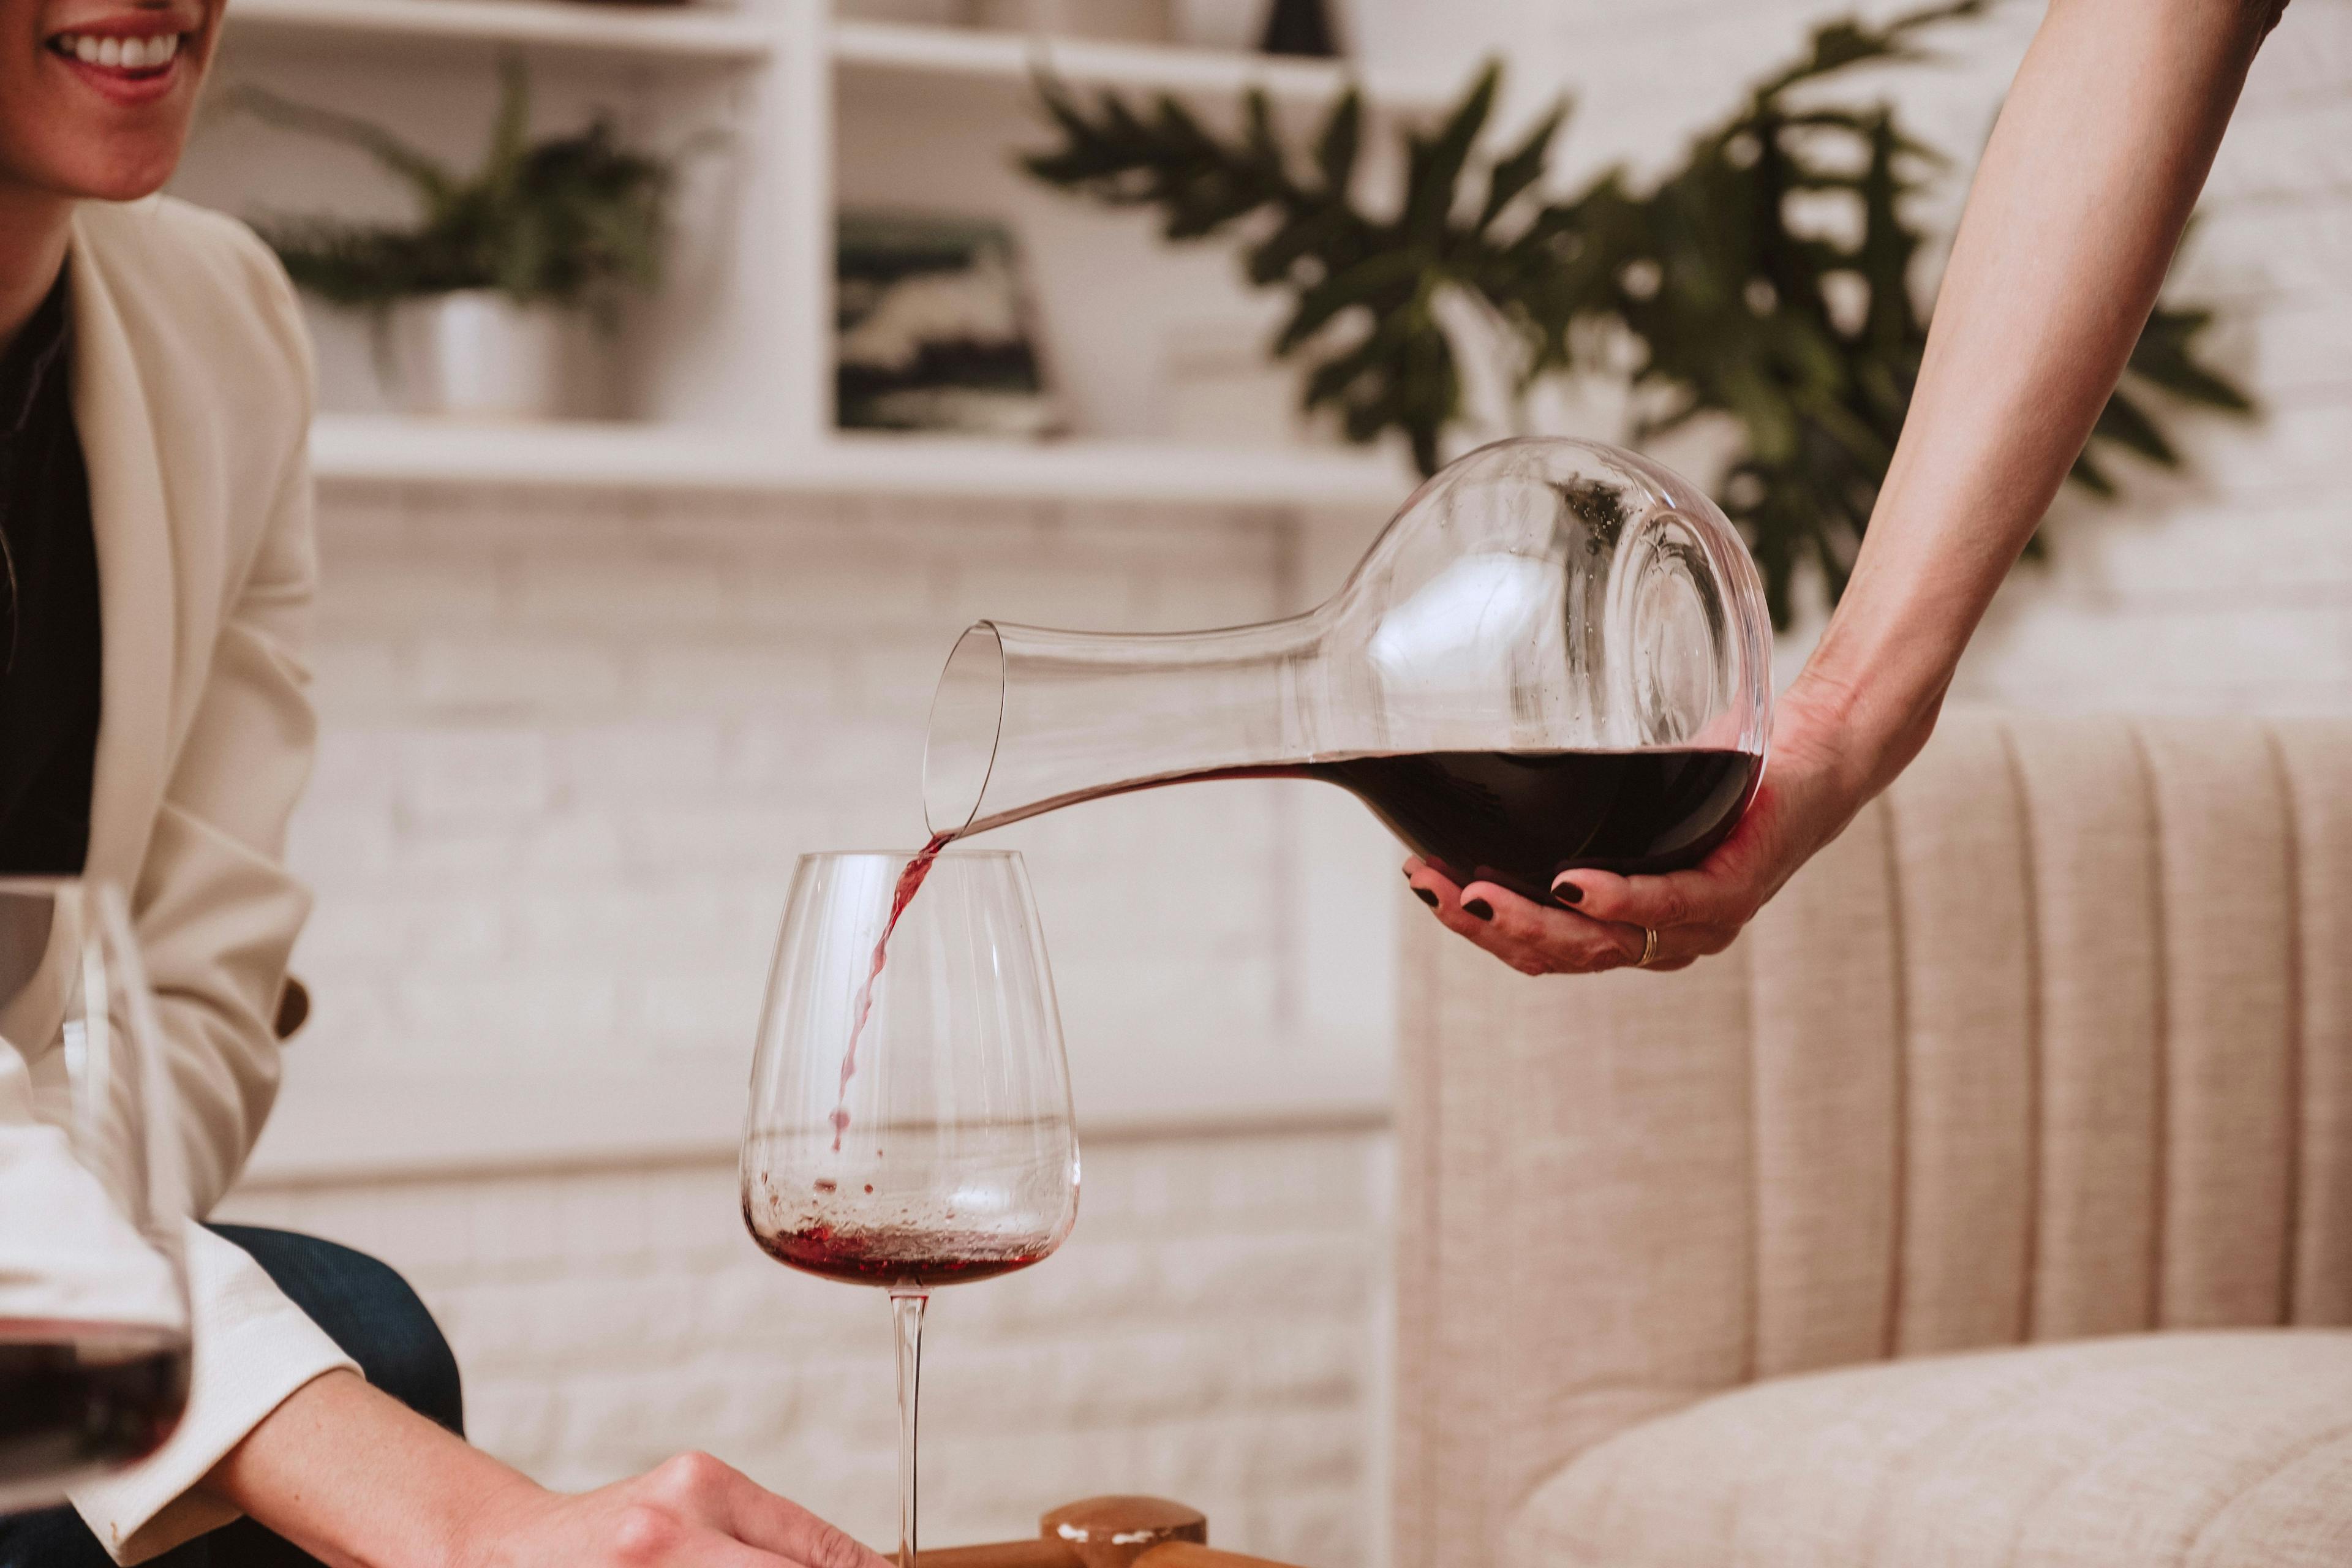 Decanting Doesn't Make You a Wine Snob